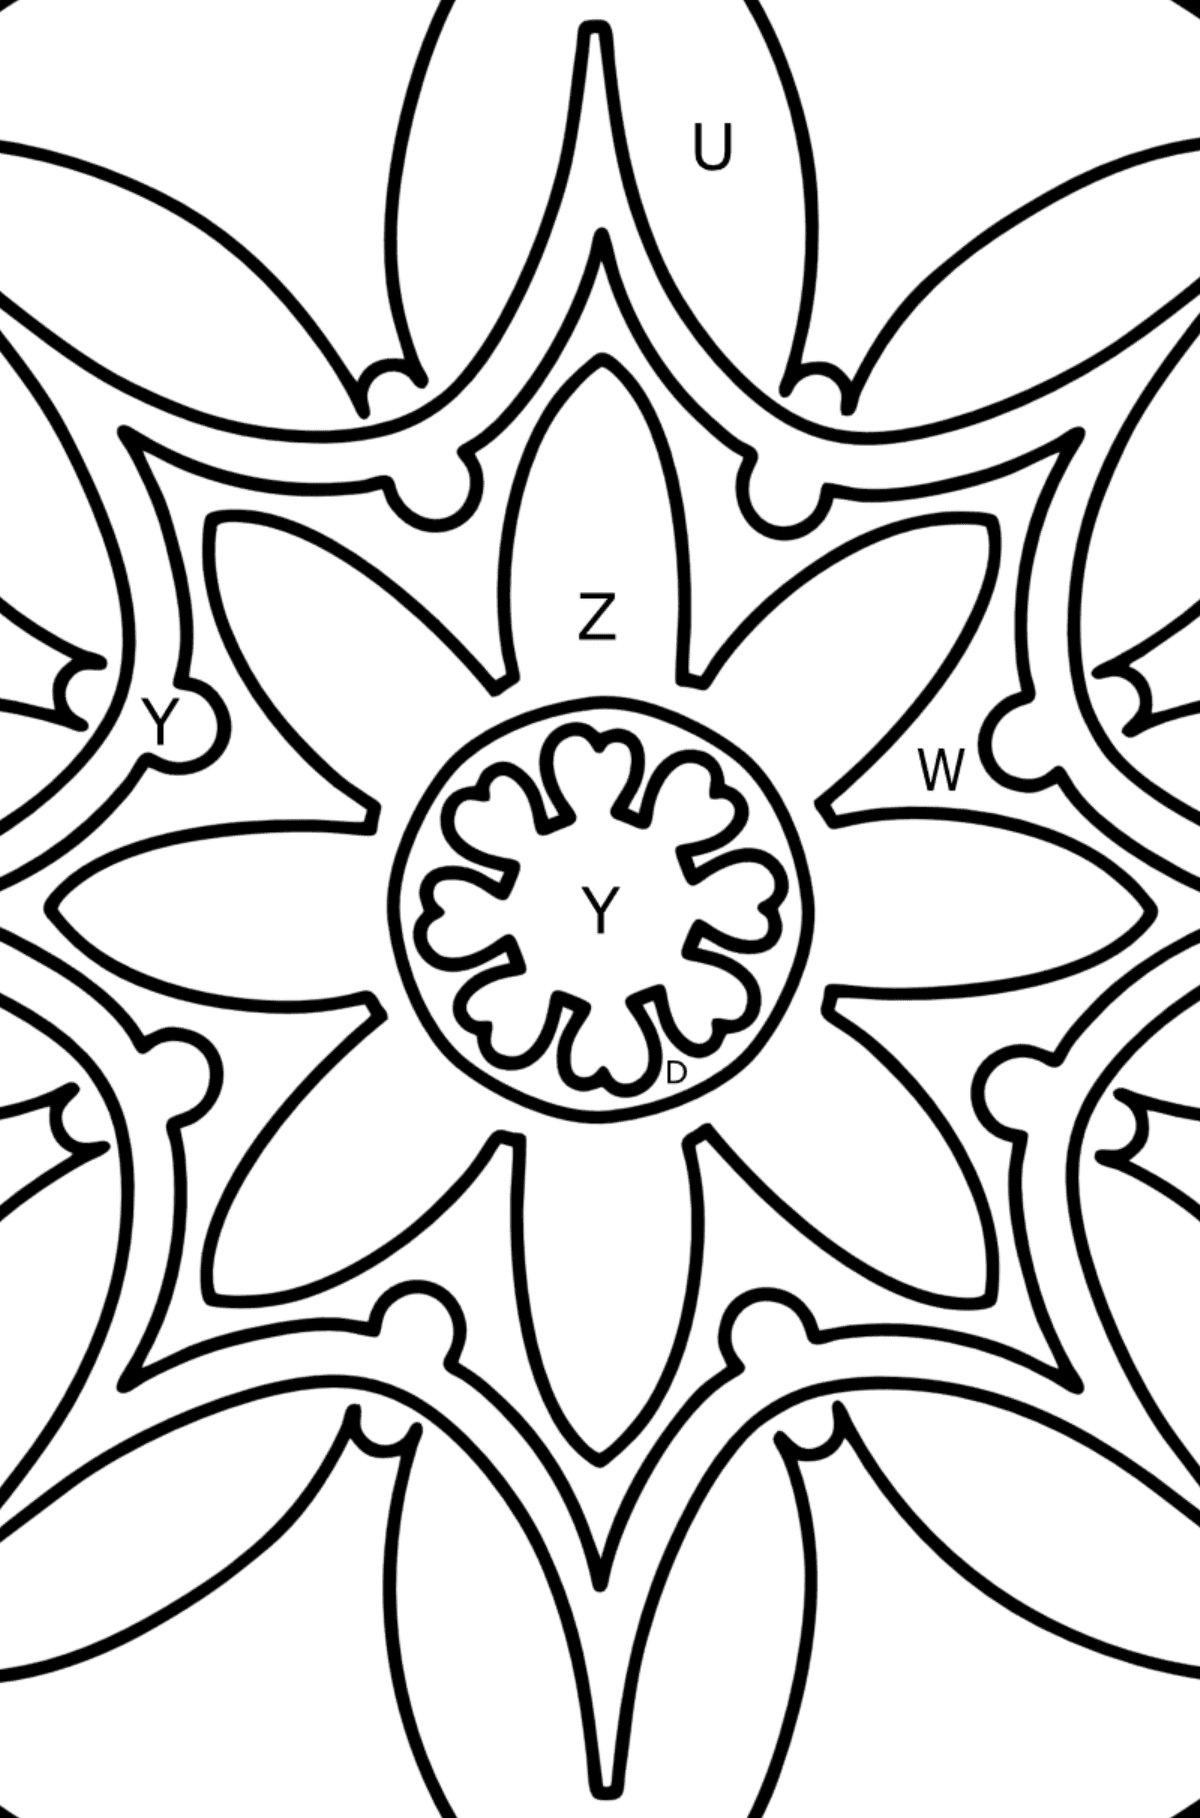 Mandala coloring page - 7 elements - Coloring by Letters for Kids